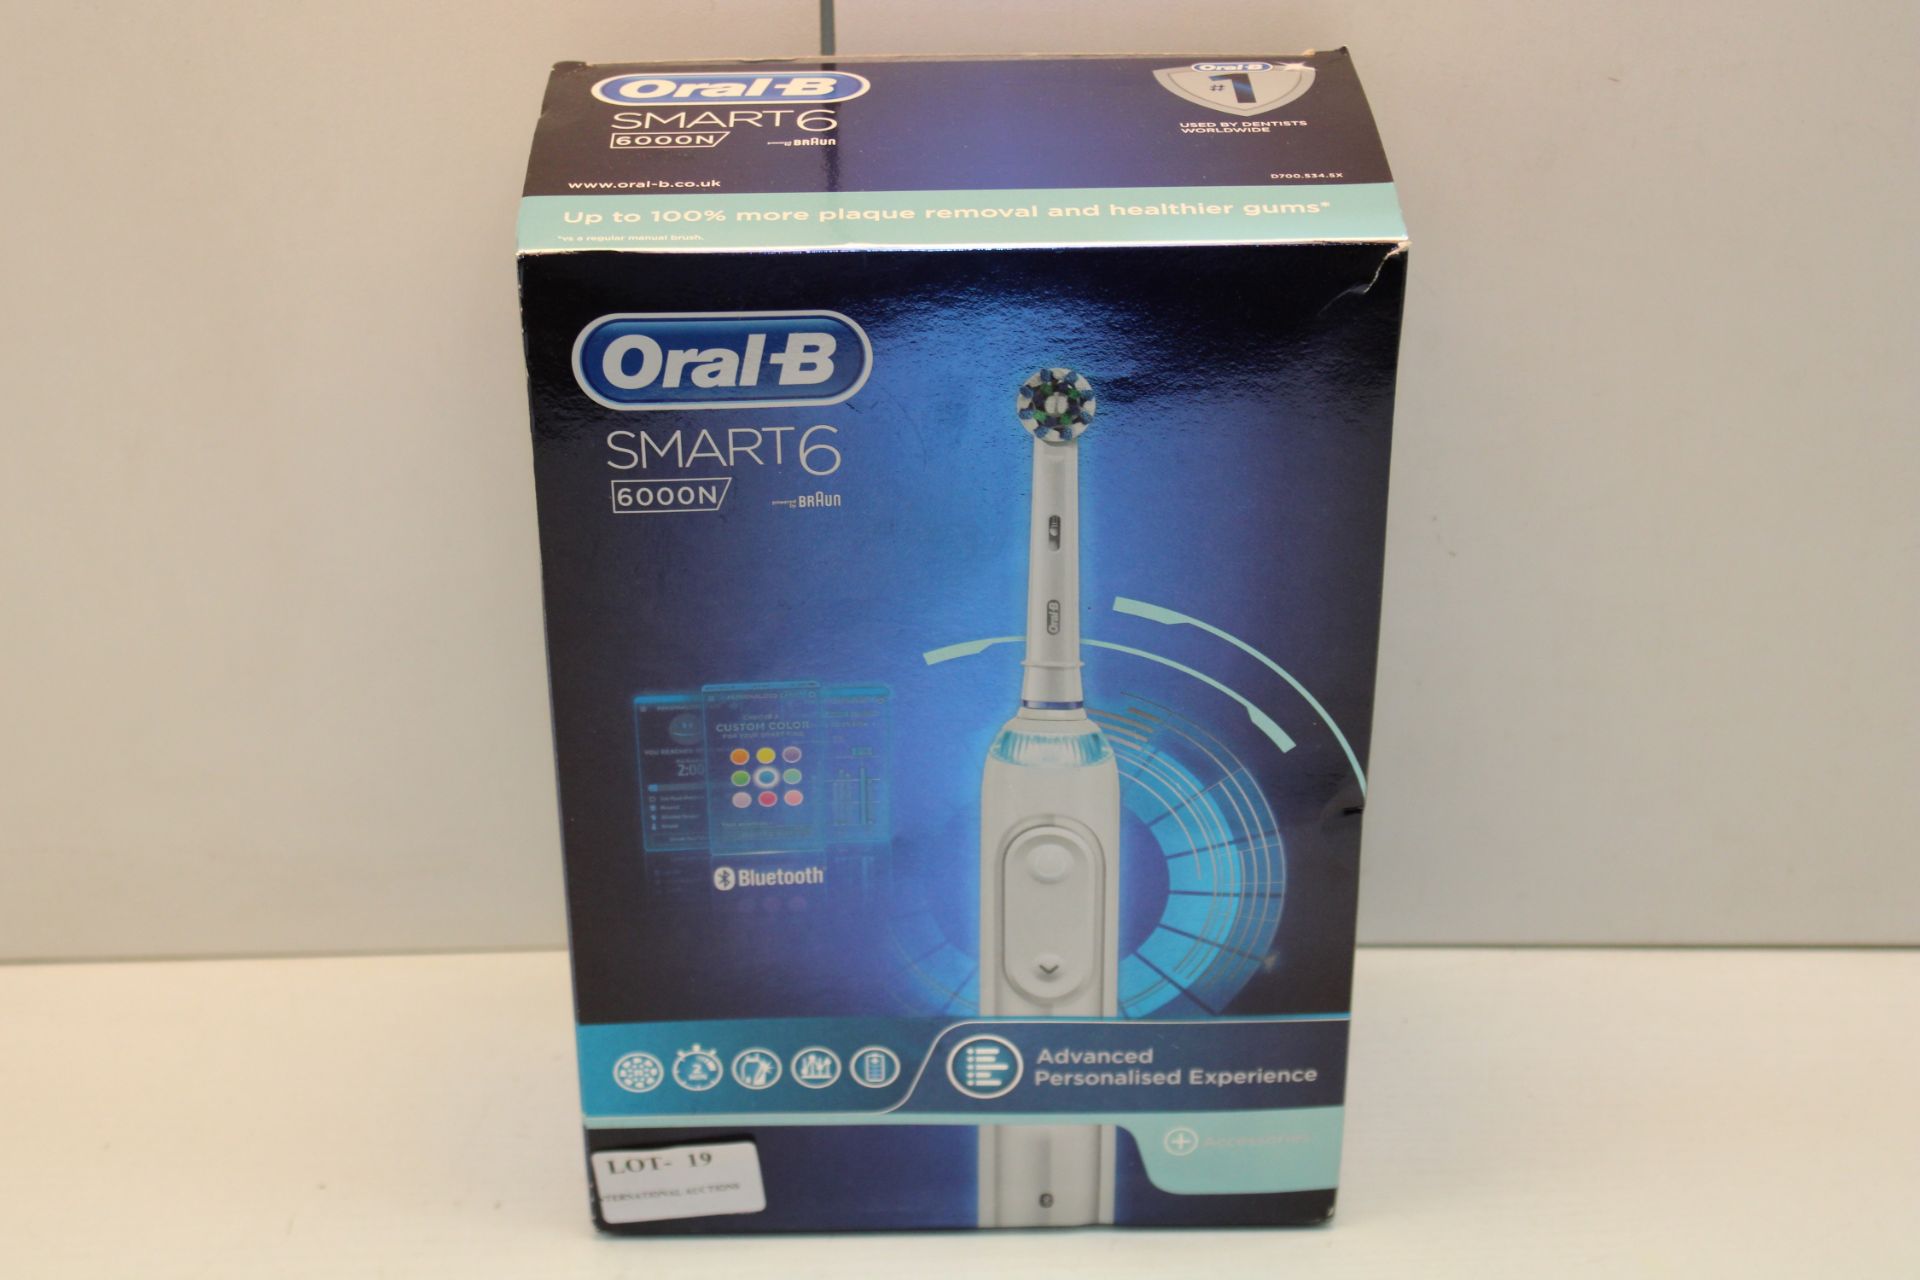 BOXED ORAL B SMART 6 6000N POWERED BY BRAUN TOOTHBRUSH RRP £104.92Condition ReportAppraisal